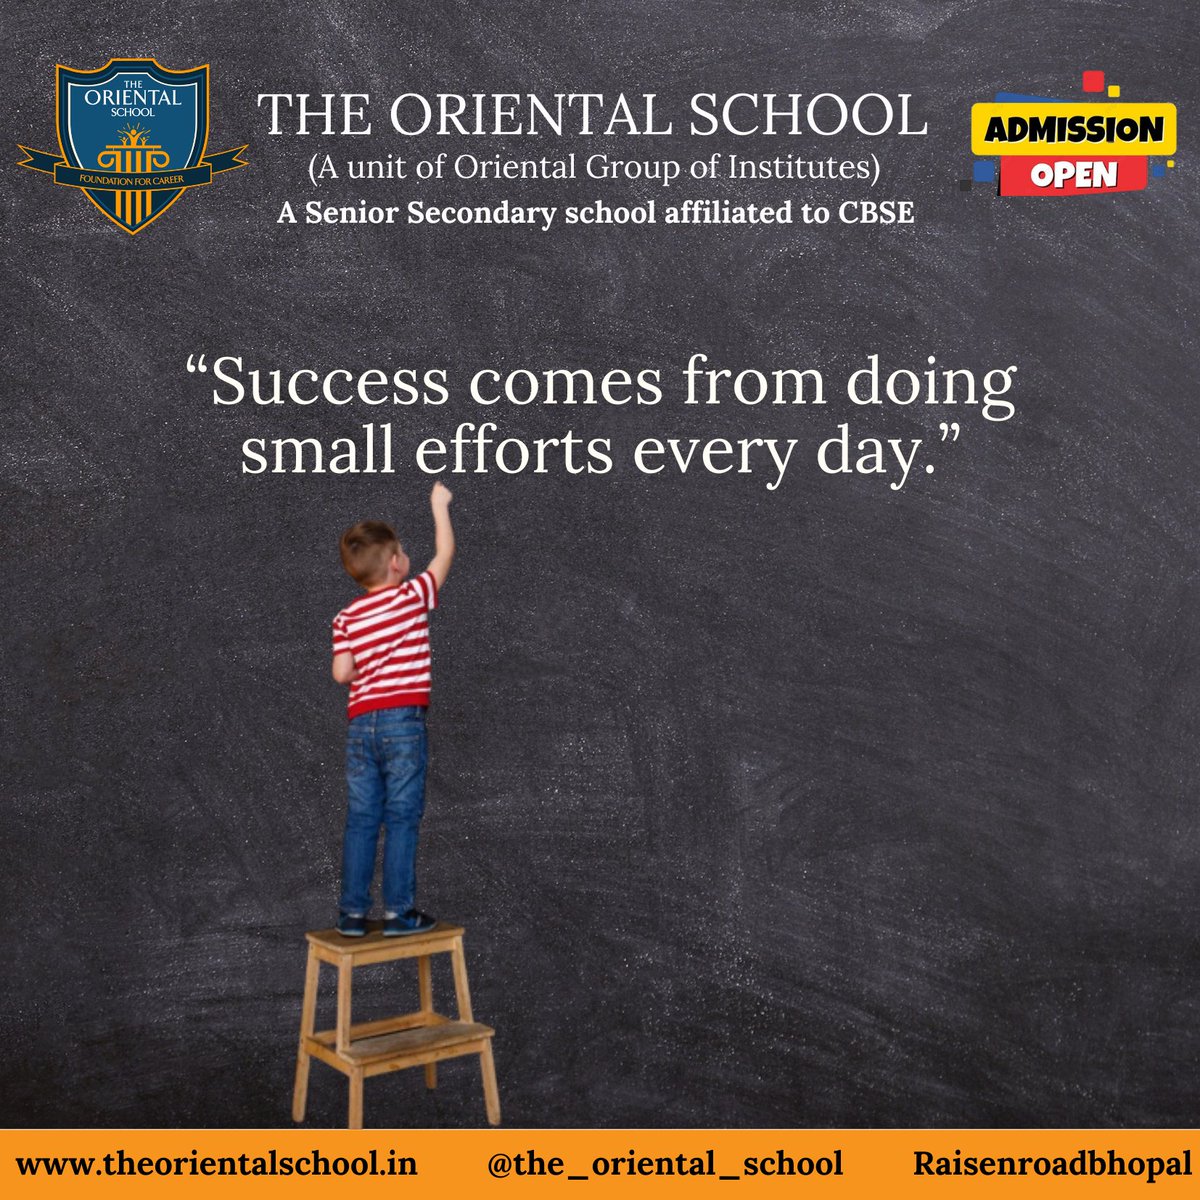 #thoughtoftheday #thoughts #ThoughtProvoking 
#worldphotographyday2023 #photography #WorldPhotographyDay 
#trivia #quiztime #quizoftheday #Englishtrivia 
#privateschoolinbhopal #admissionoopenfor2023 #admissionsopen2023_24 #sahodayacbse #theorientalschool #leadingschoolsofbhopal